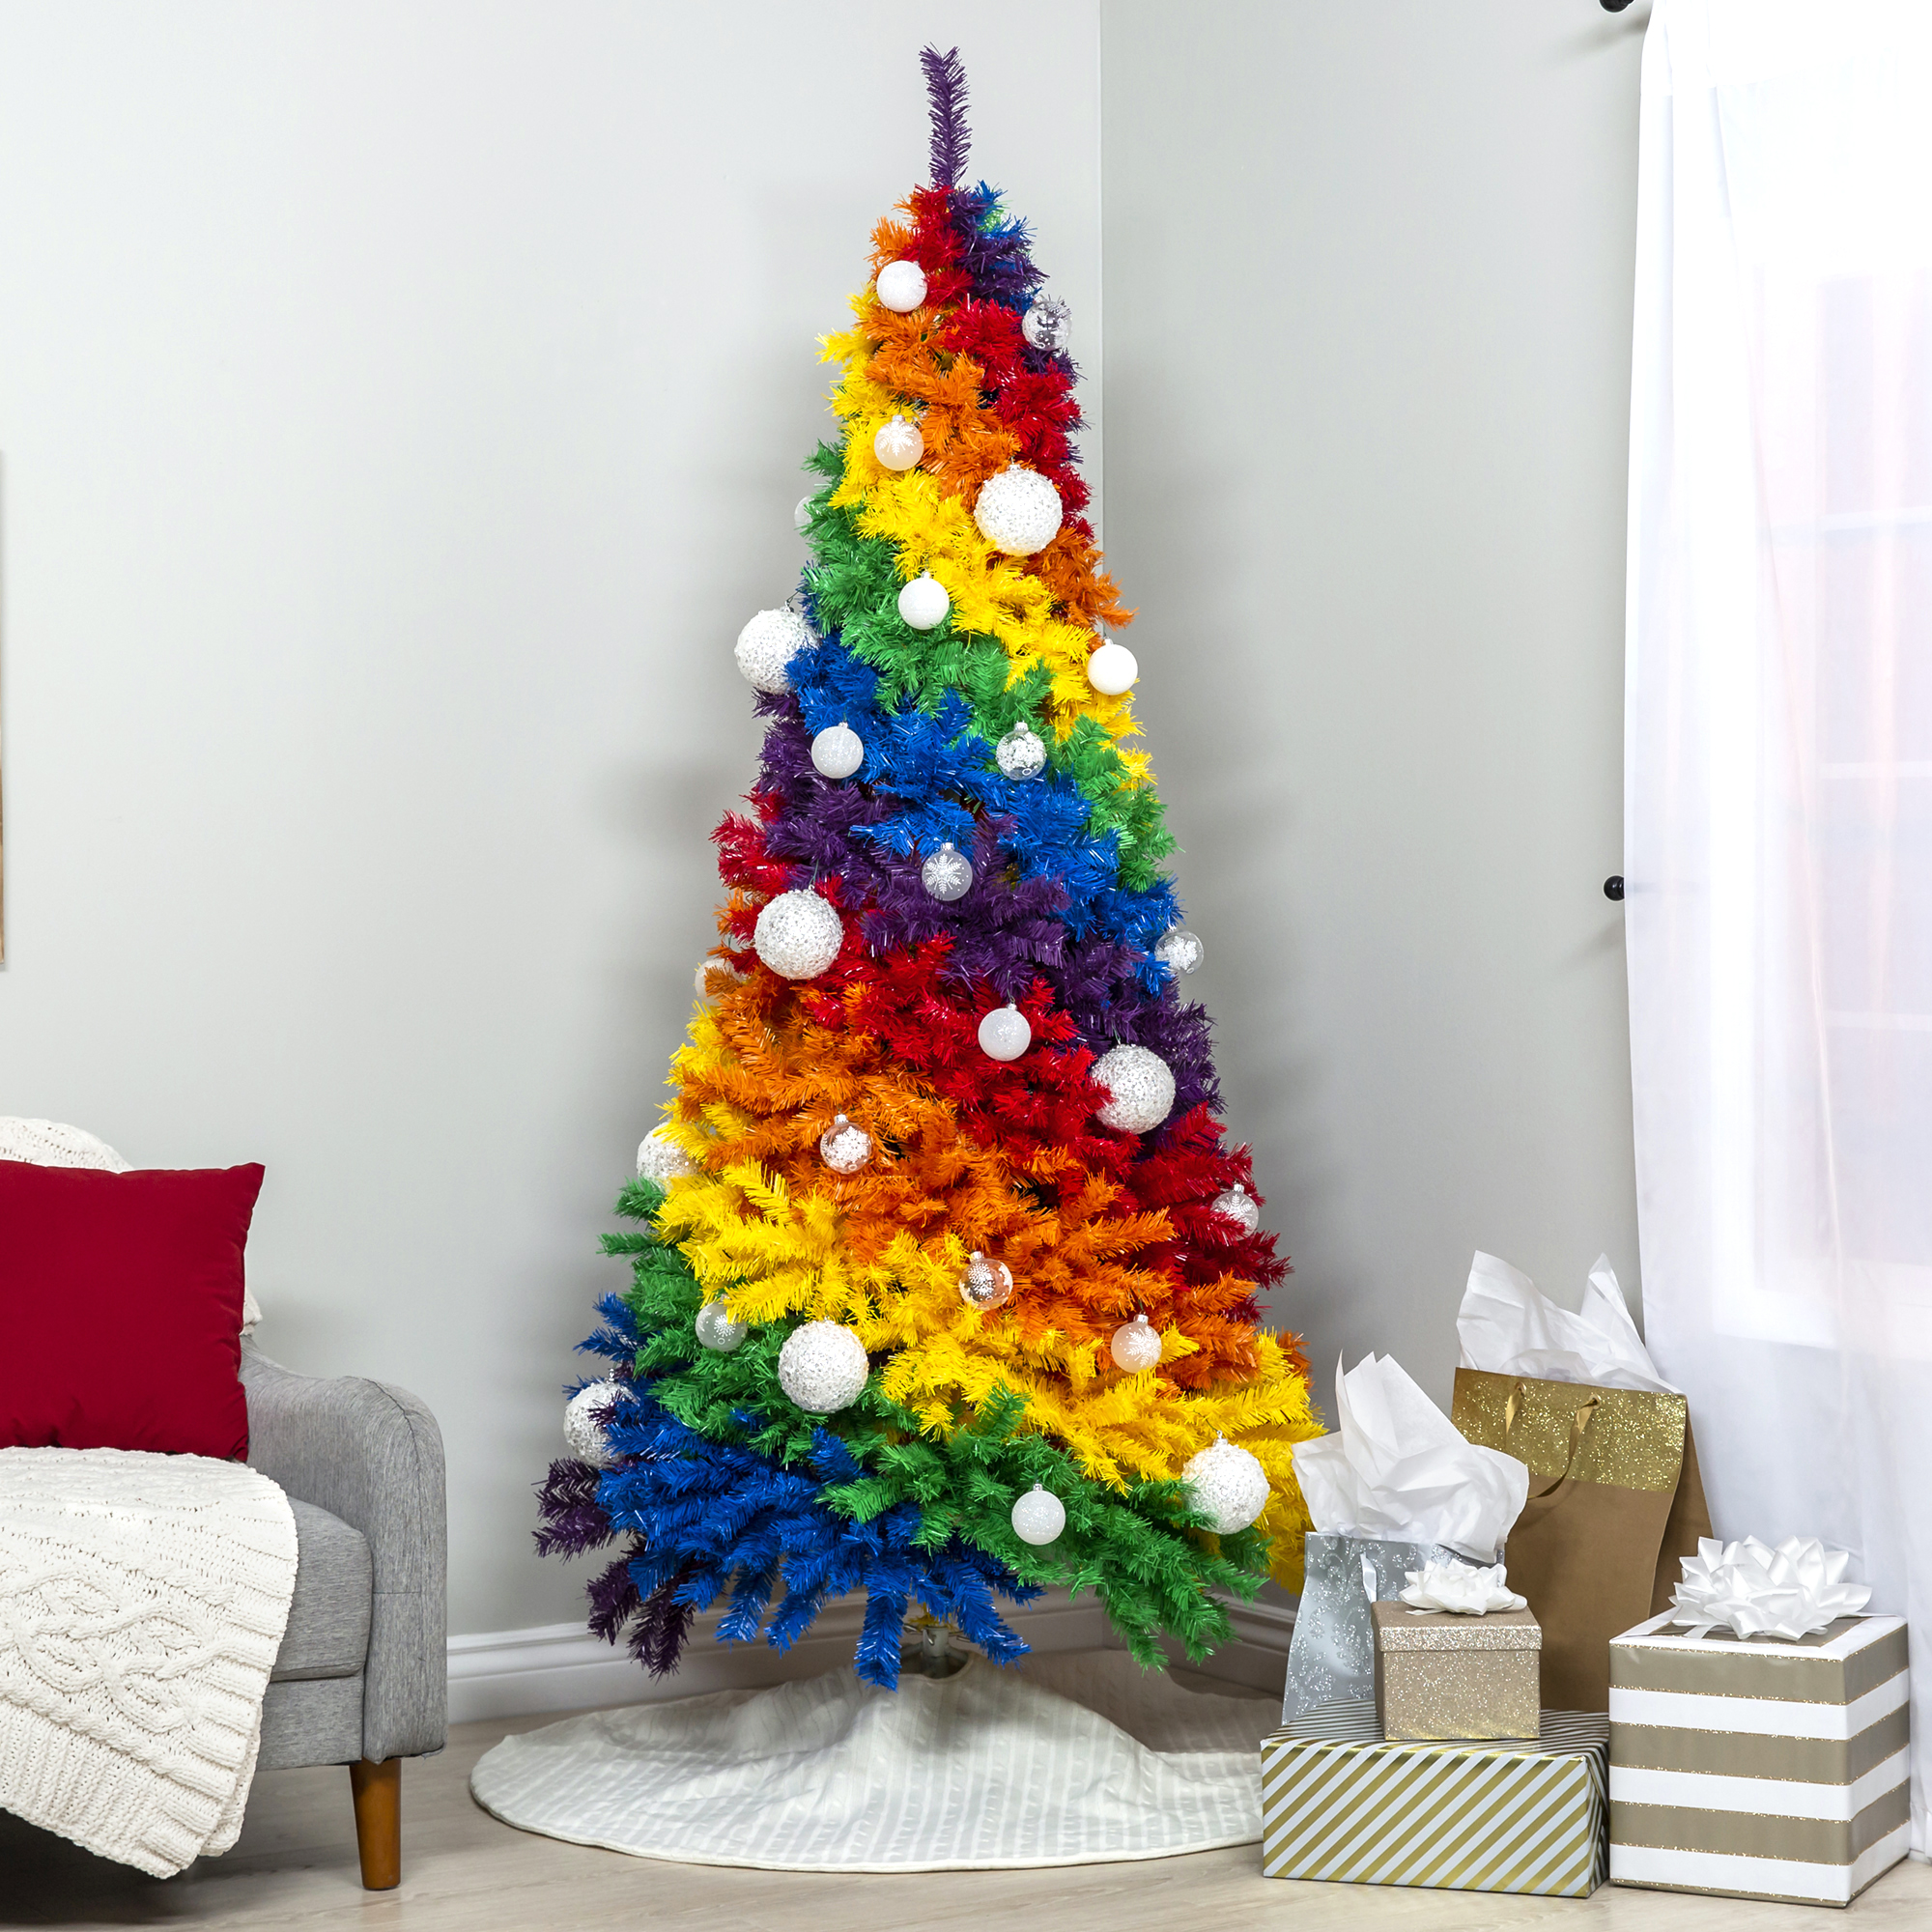 Best Choice Products 7ft Artificial Colorful Rainbow Christmas Tree, Full Fir Holiday Decor w/ 1,213 Tips, Metal Stand - image 3 of 8